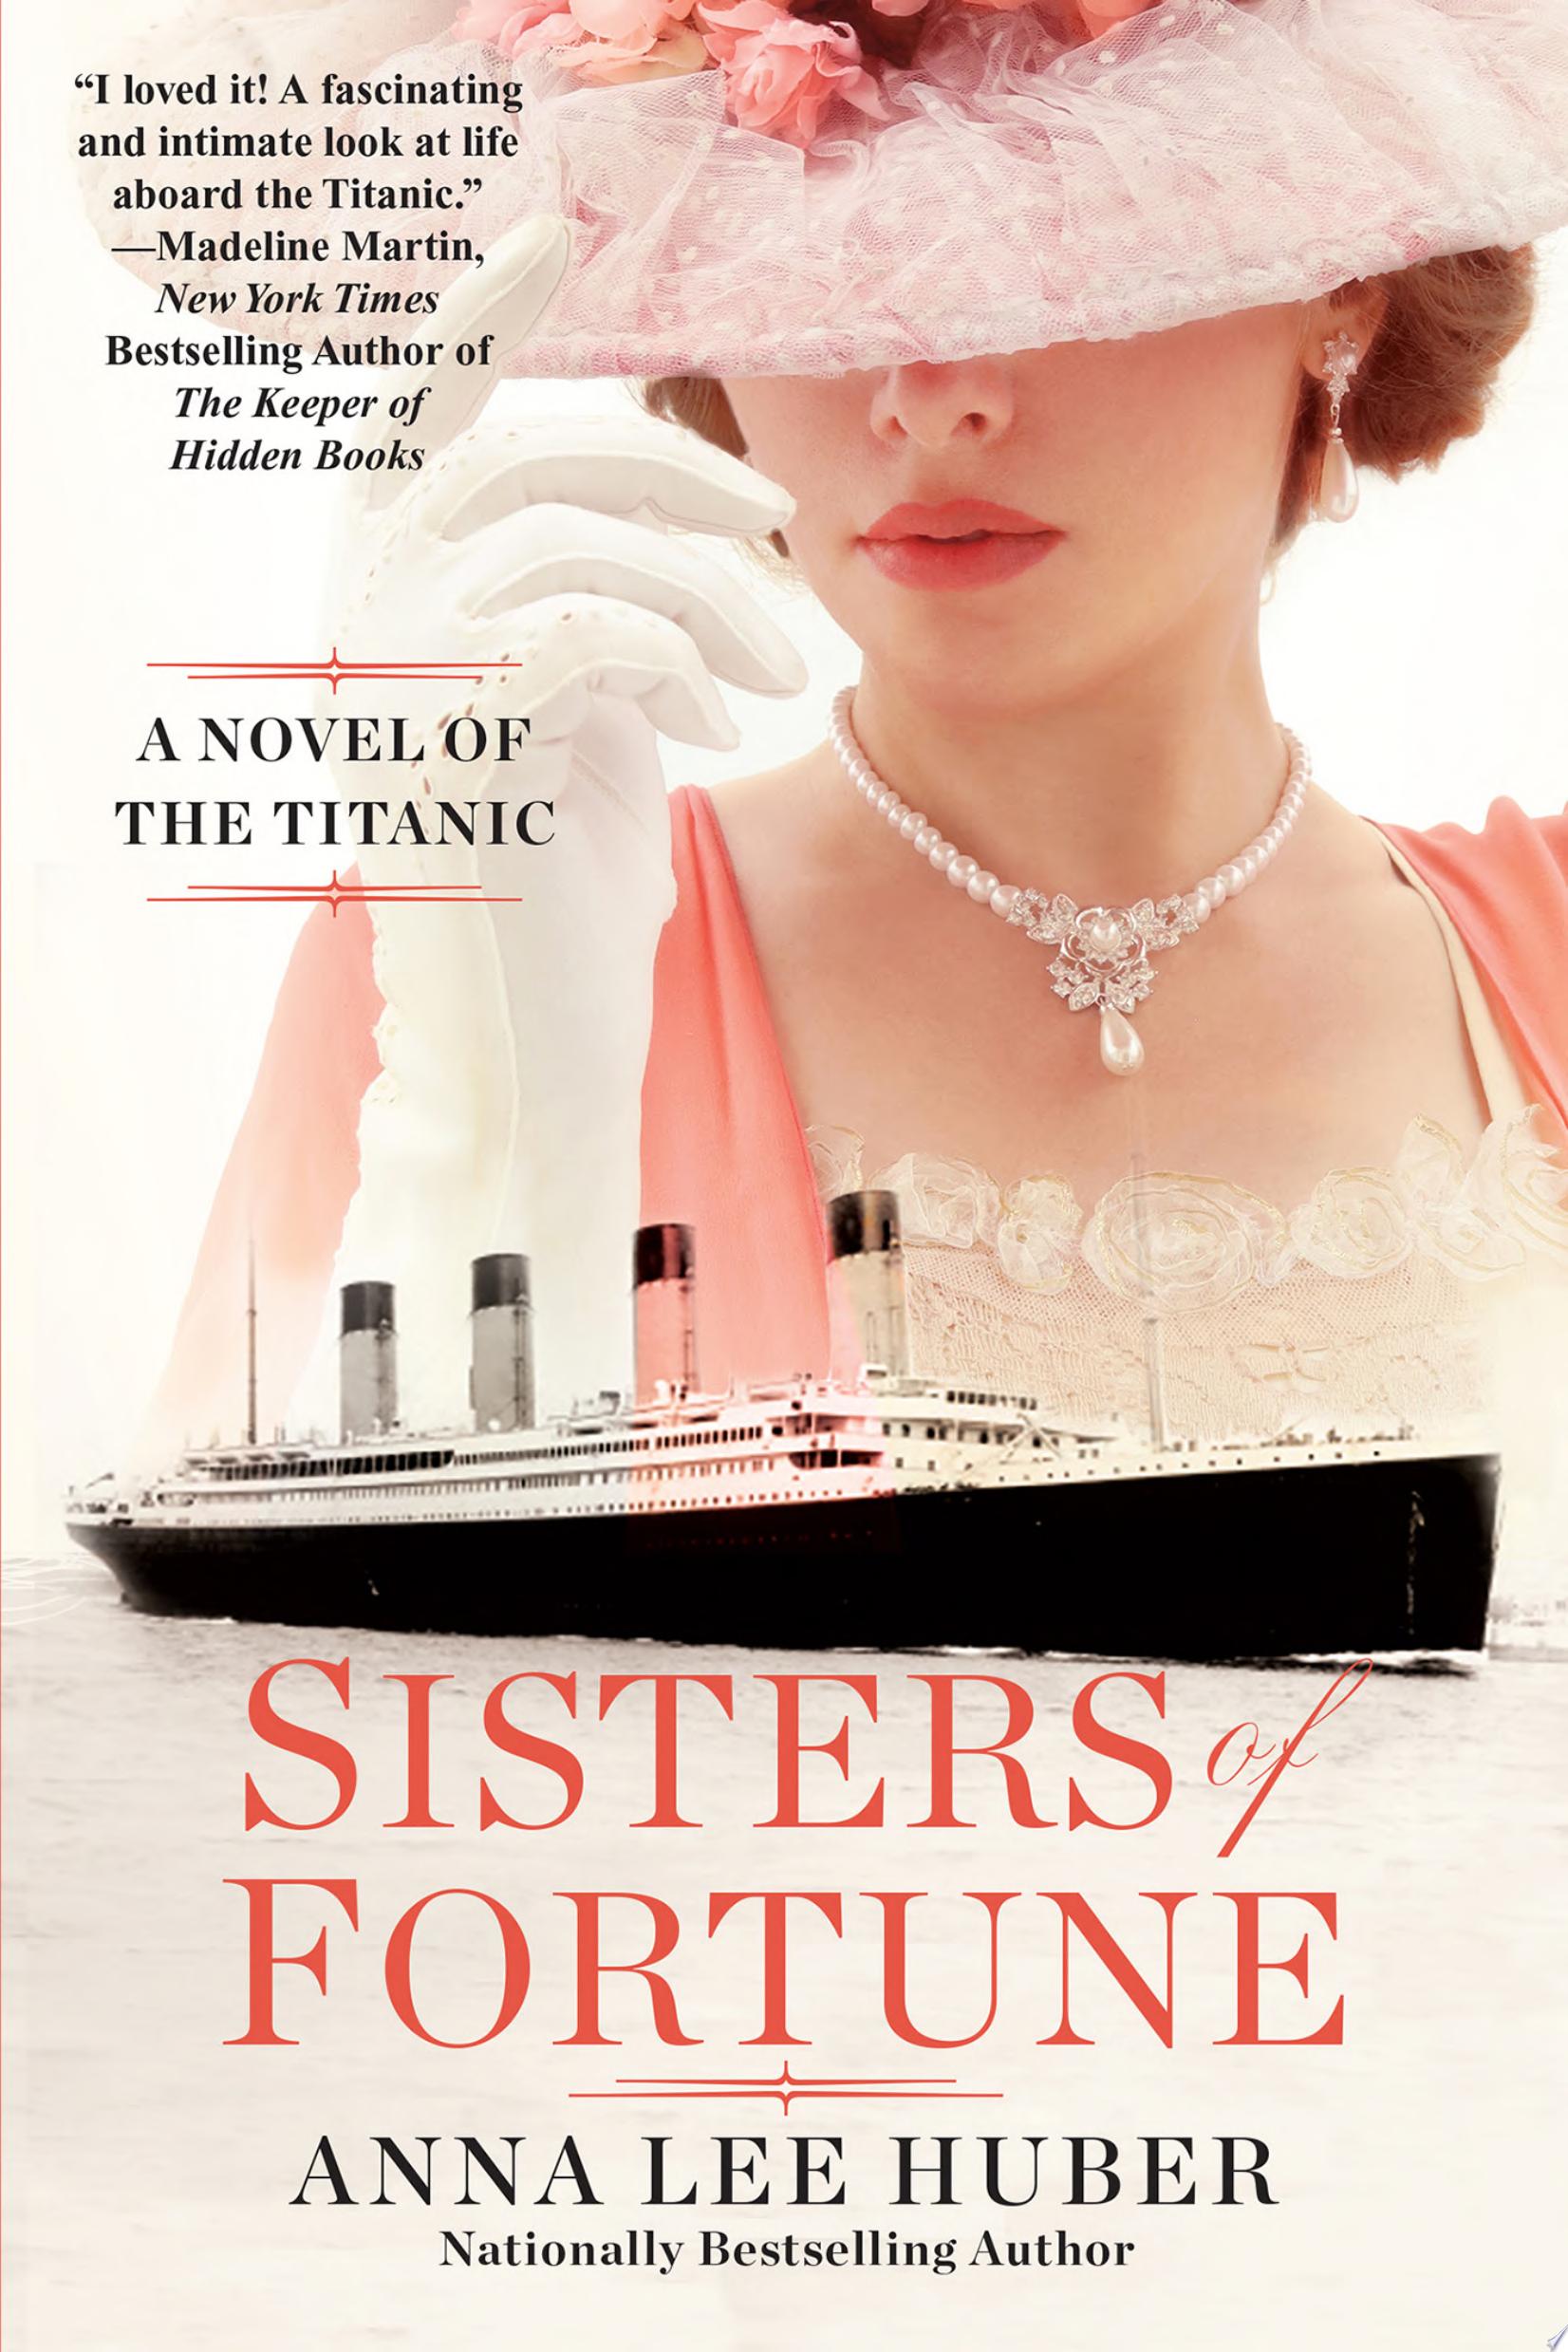 Image for "Sisters of Fortune"